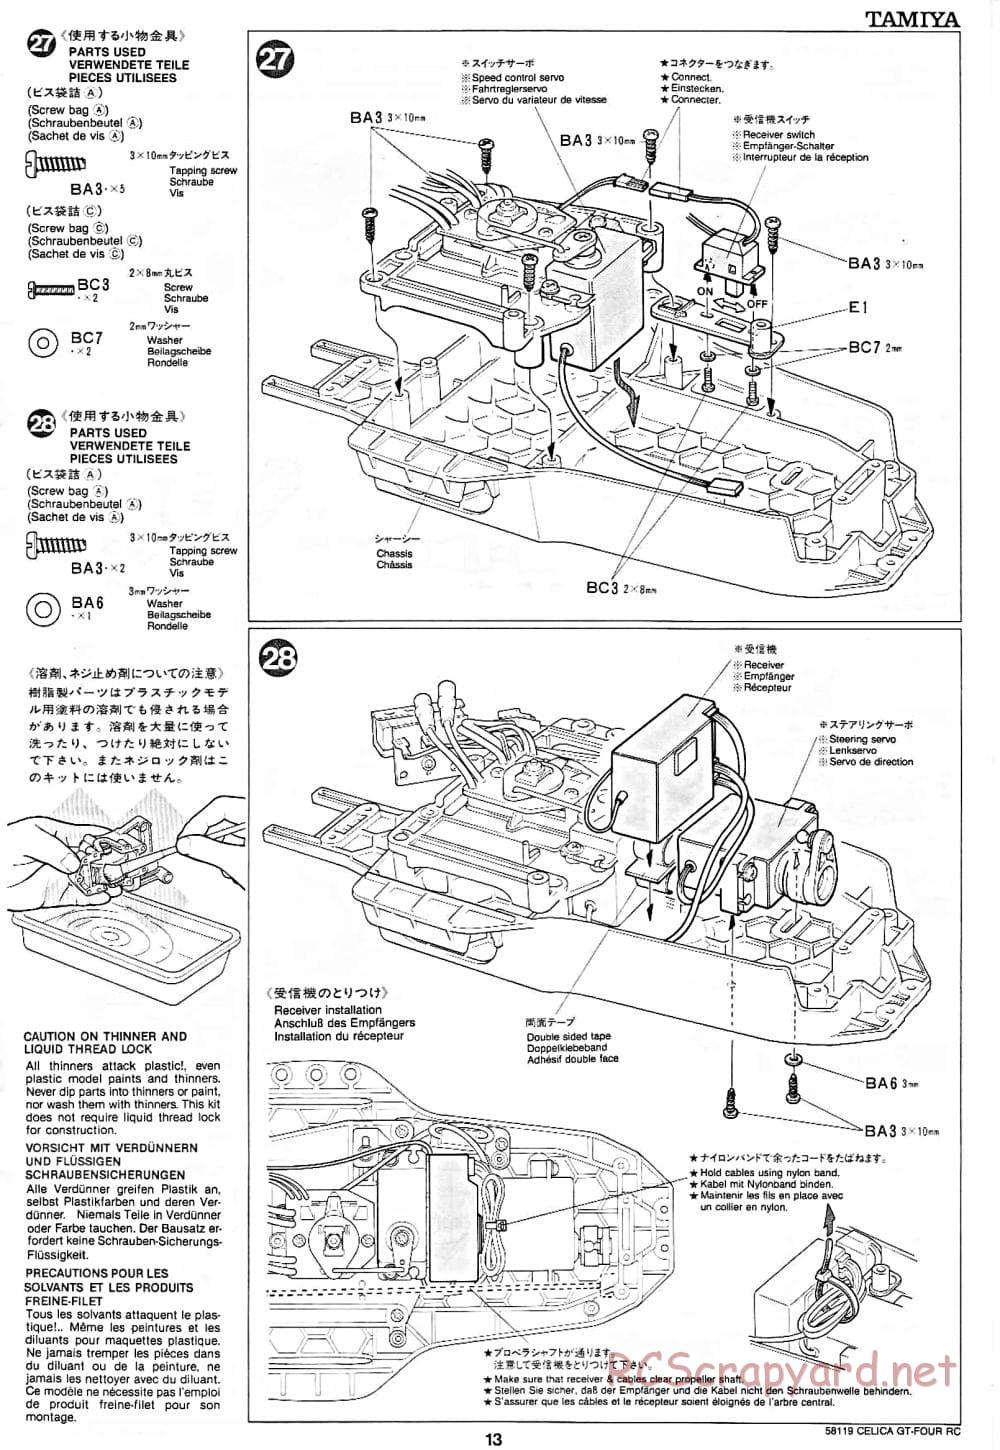 Tamiya - Toyota Celica GT-Four RC - TA-01 Chassis - Manual - Page 13